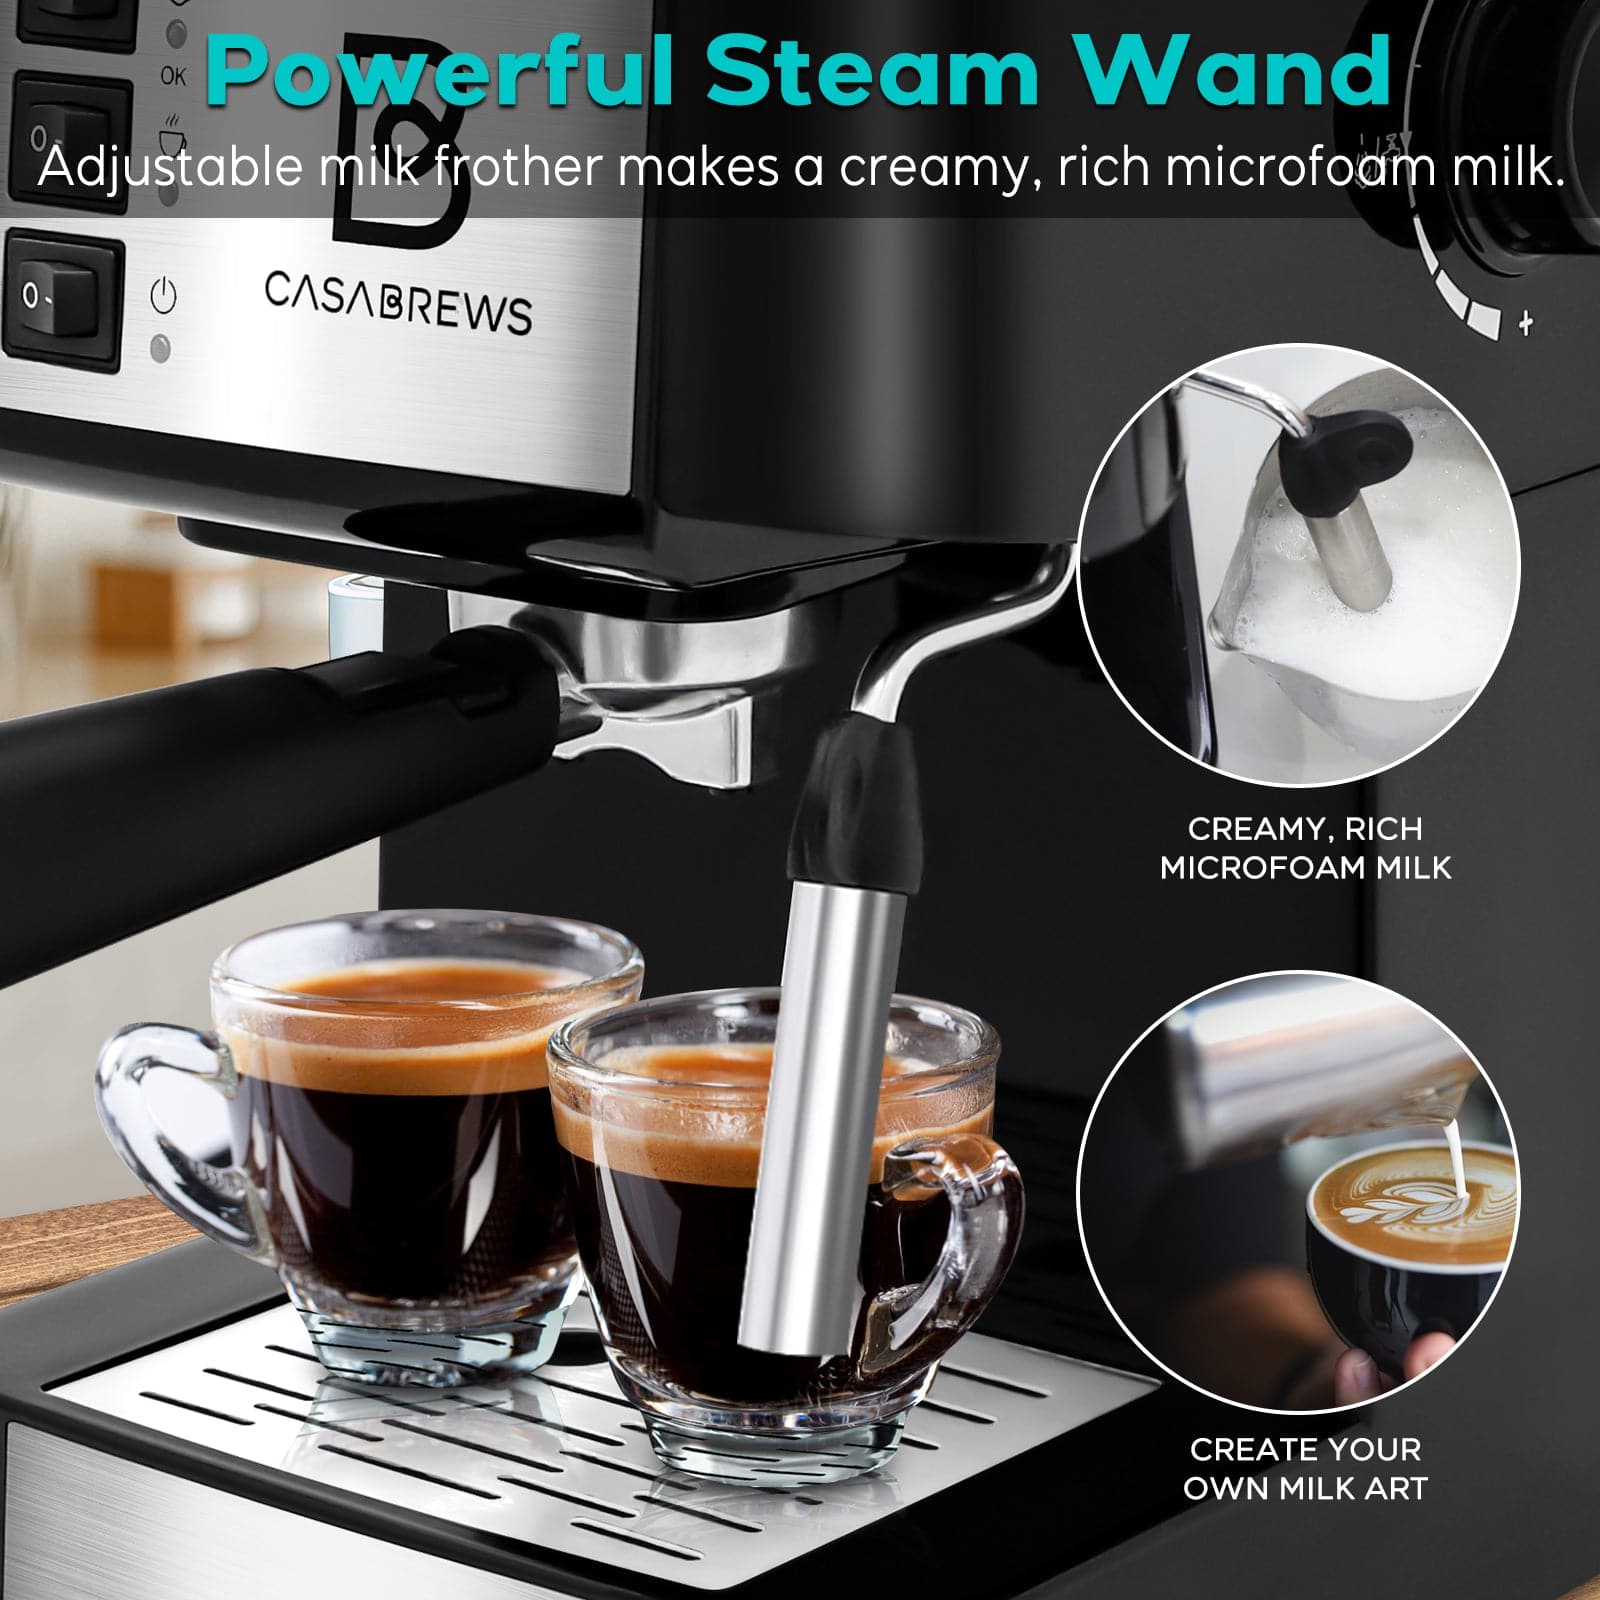 Casabrews ProfessionalGood Compact 20 Bar Espresso Machine for Home with Milk Frother Wand CM1699